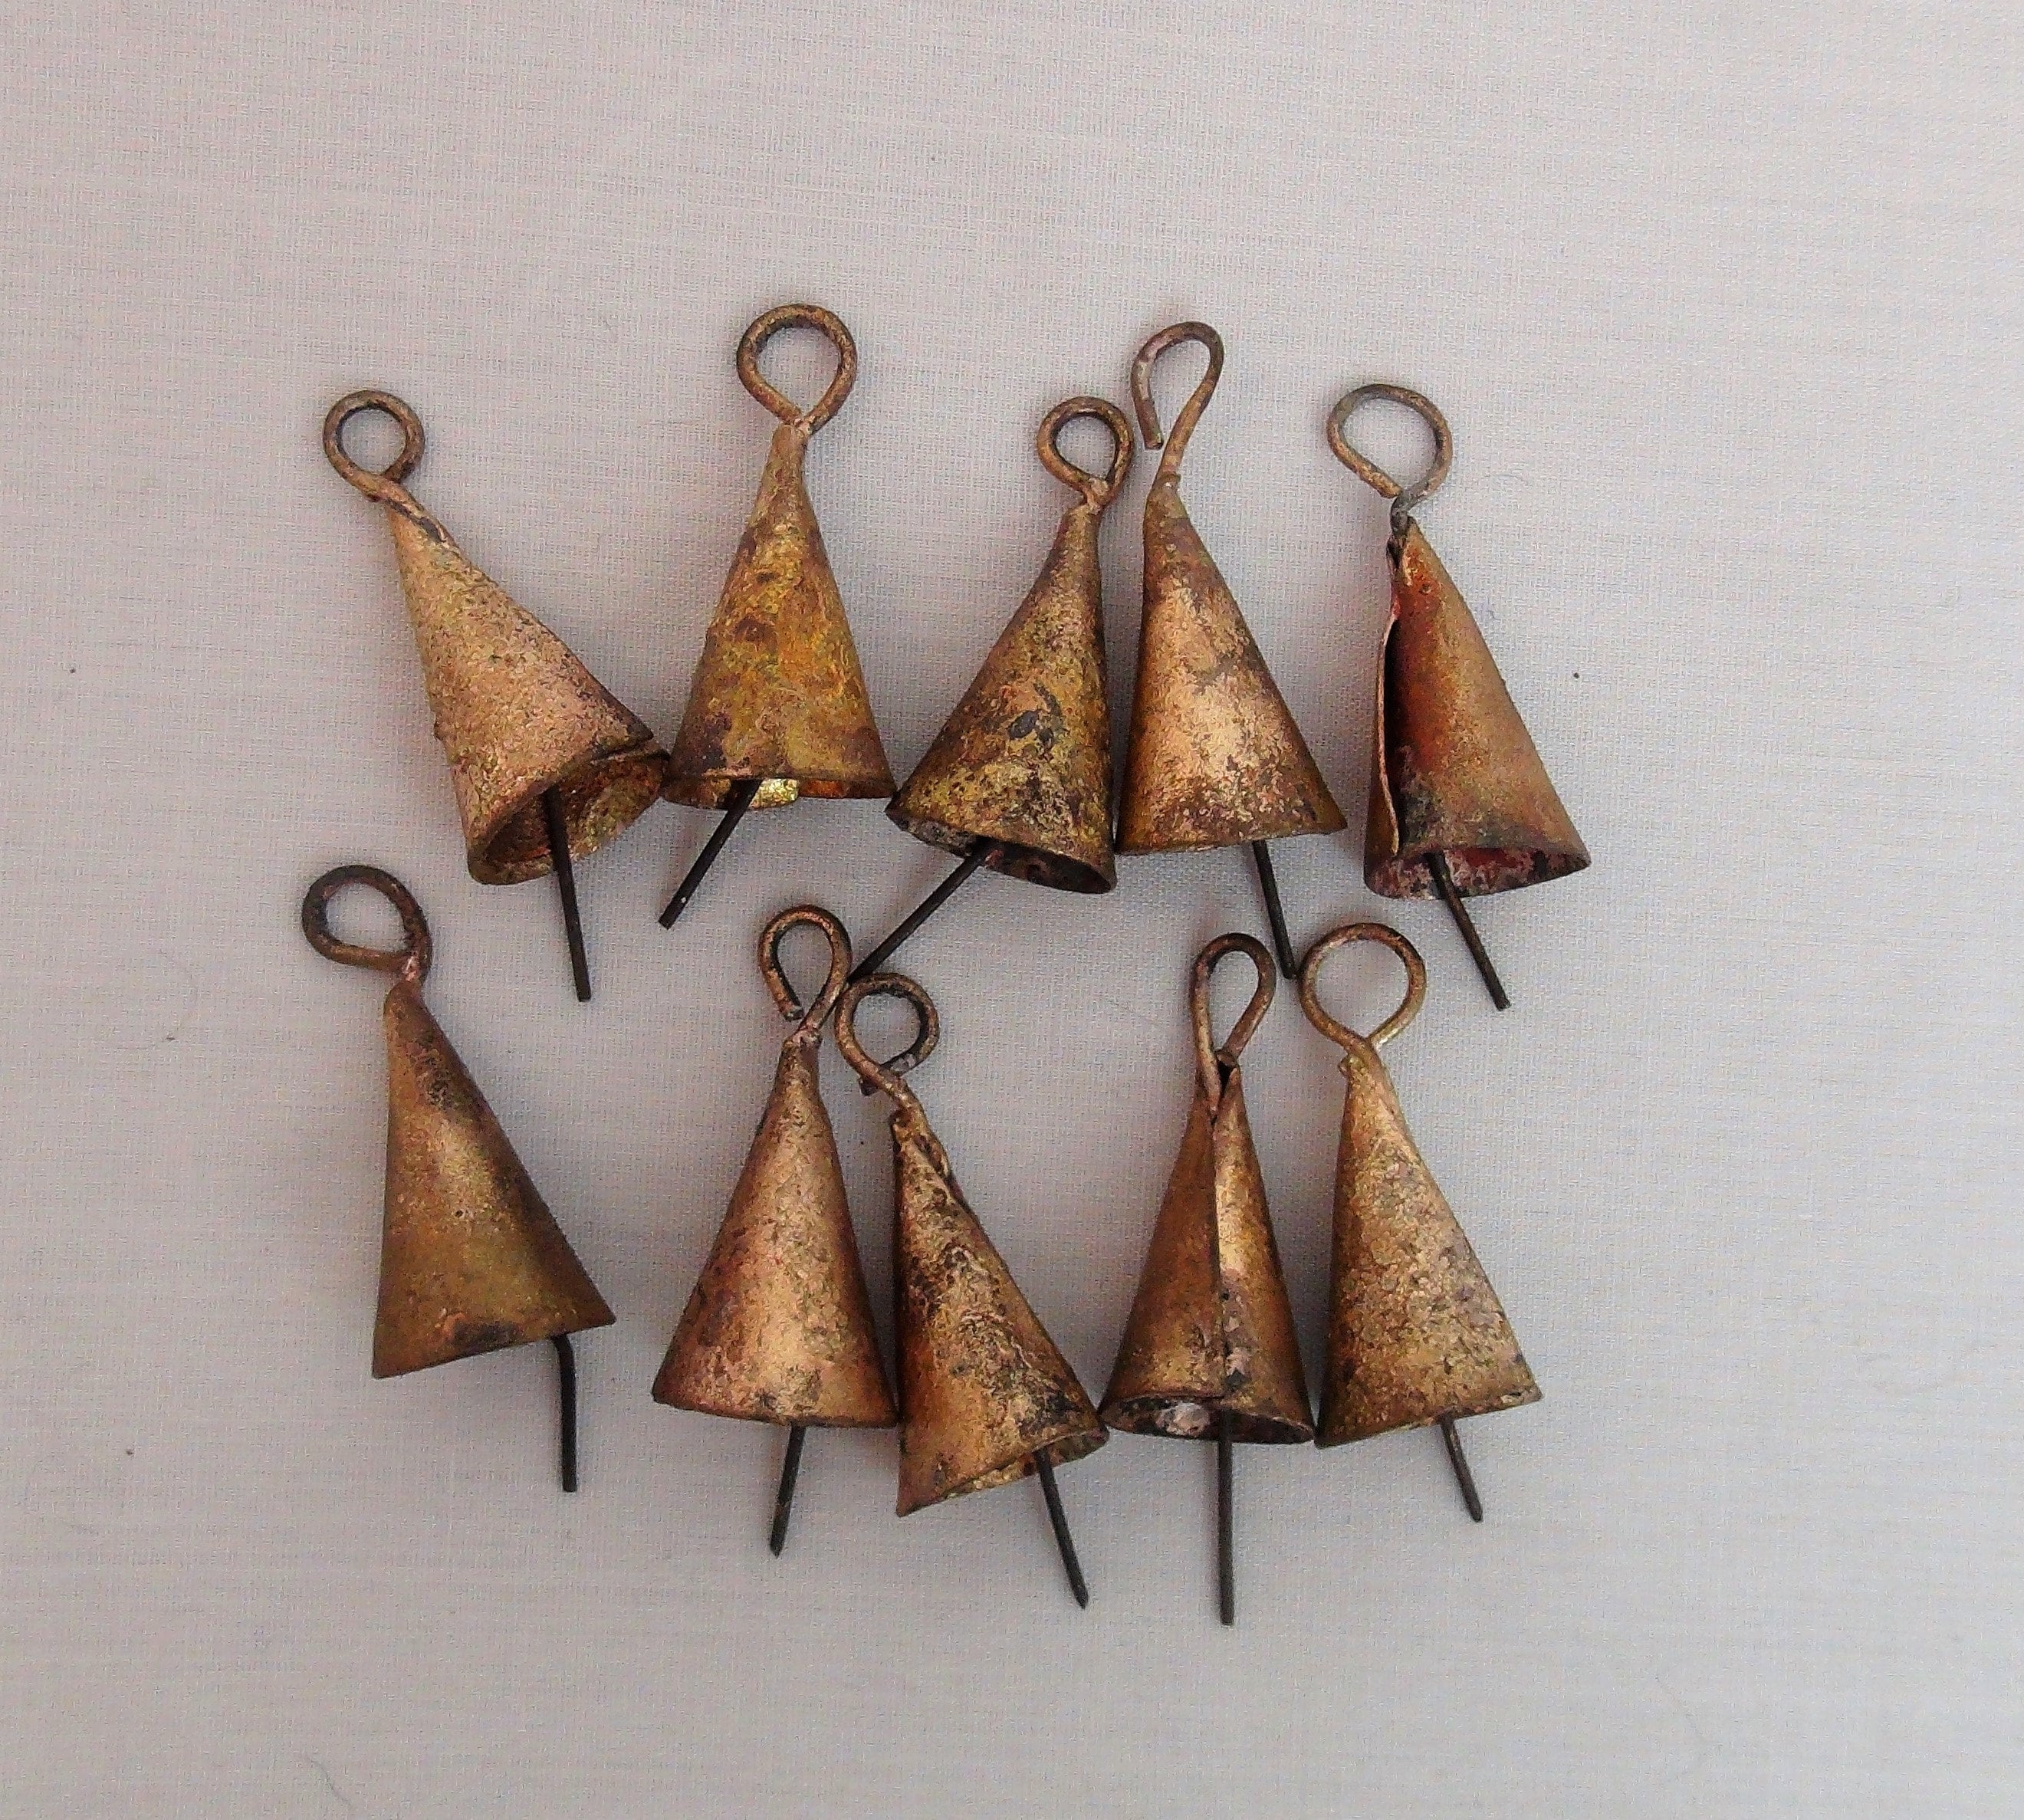 Recycled Iron Sheet Metal Bells-Great for Craft Projects-Make Wind